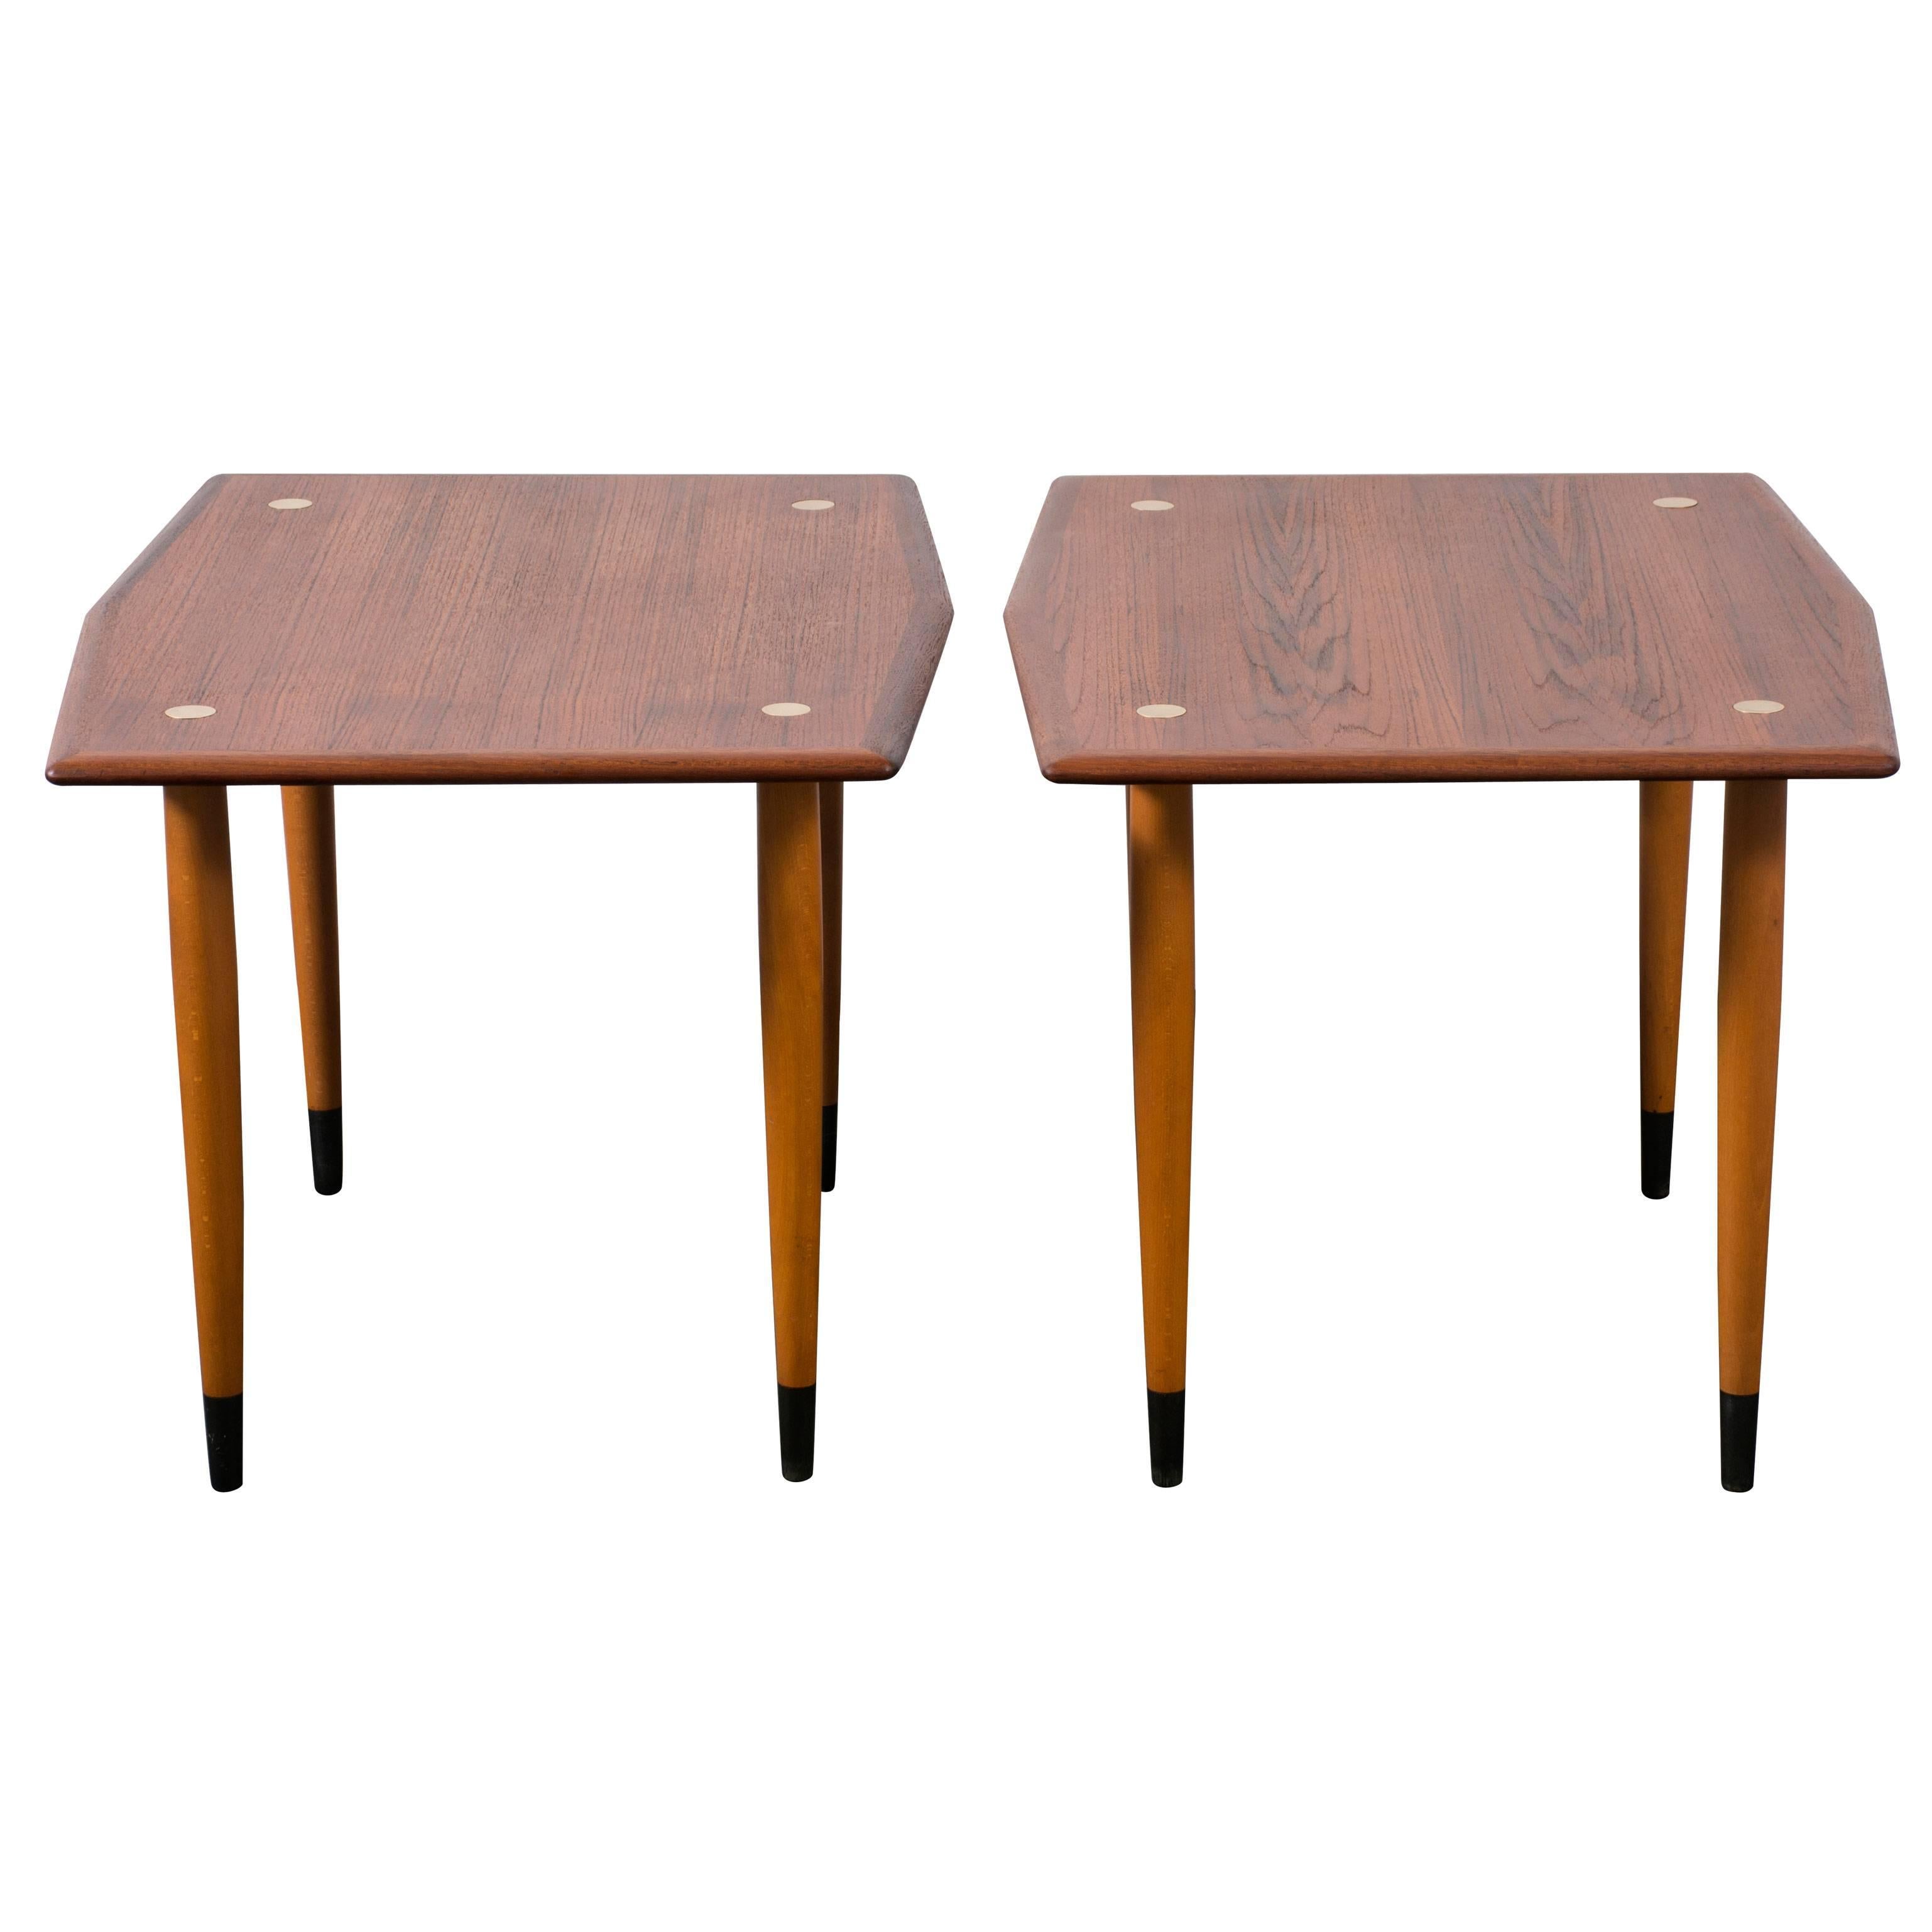 Pair of Vintage Side Tables by DUX